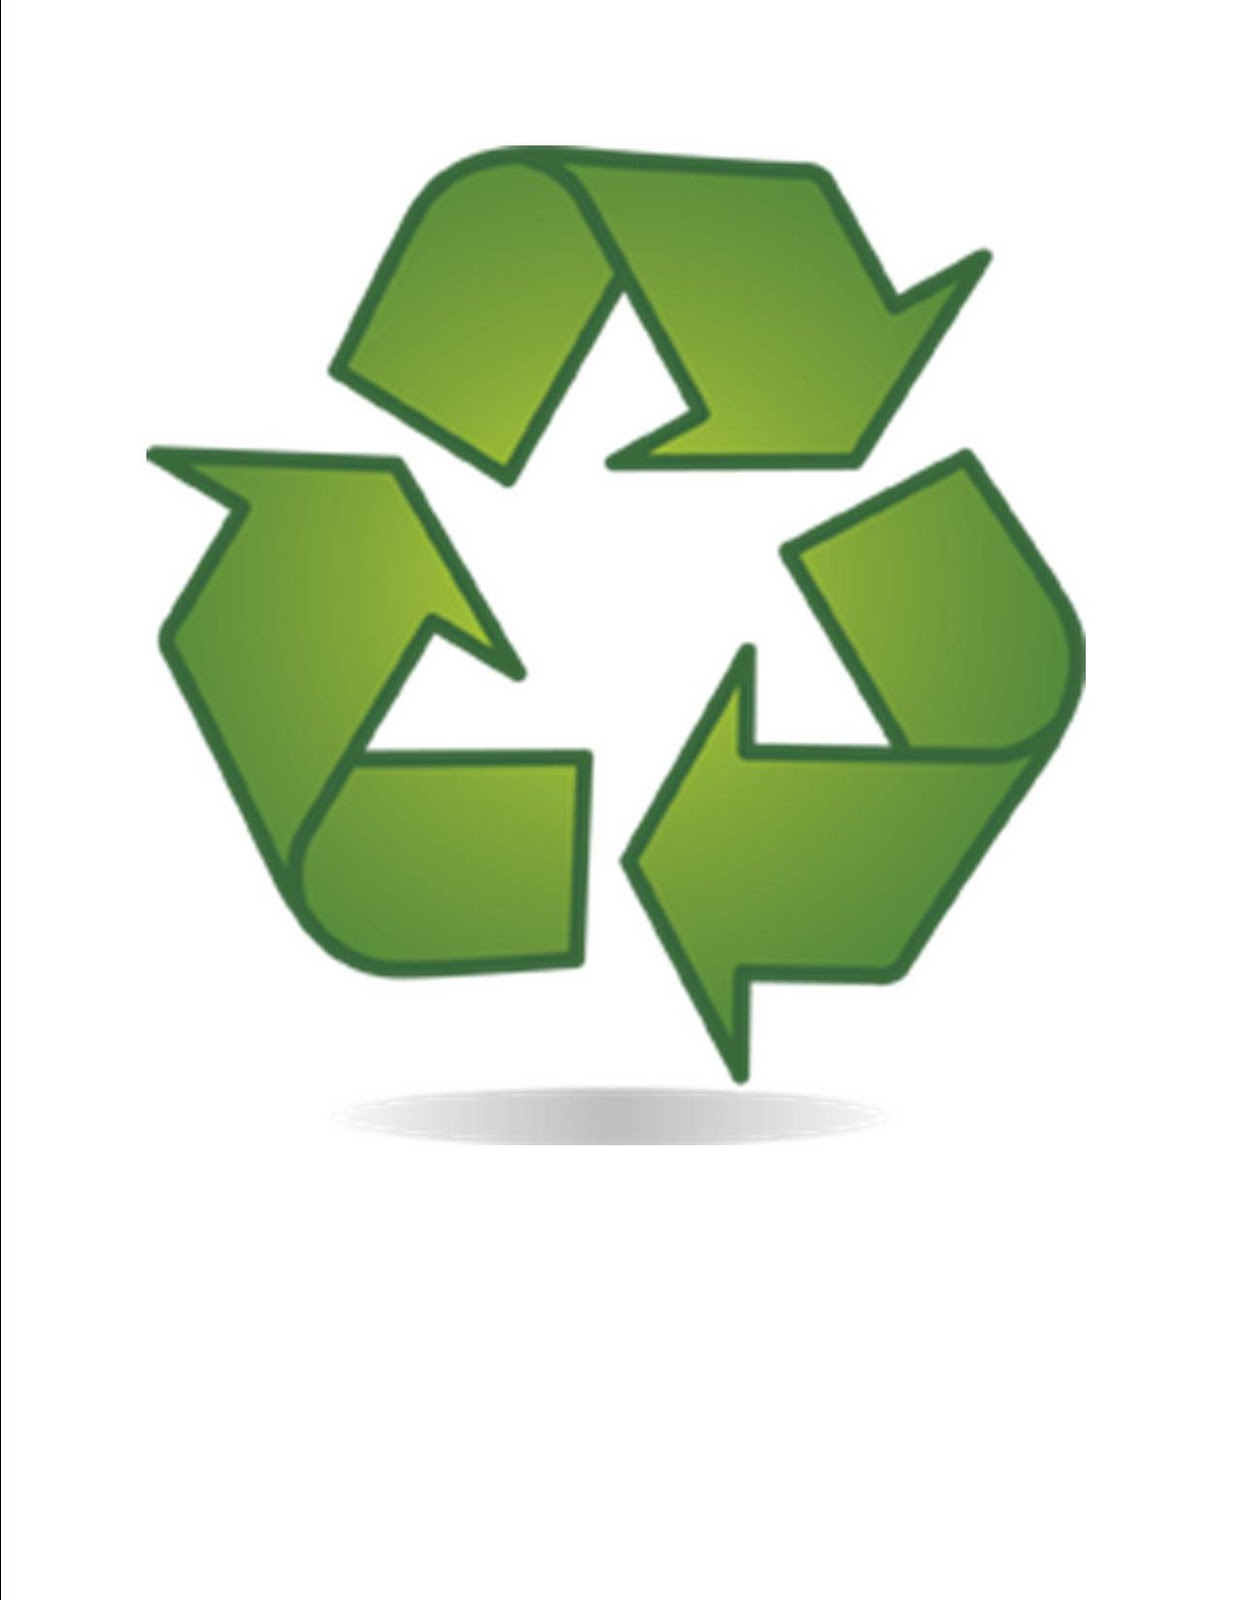 Free Recycling Signs Printable, Download Free Recycling Signs Printable